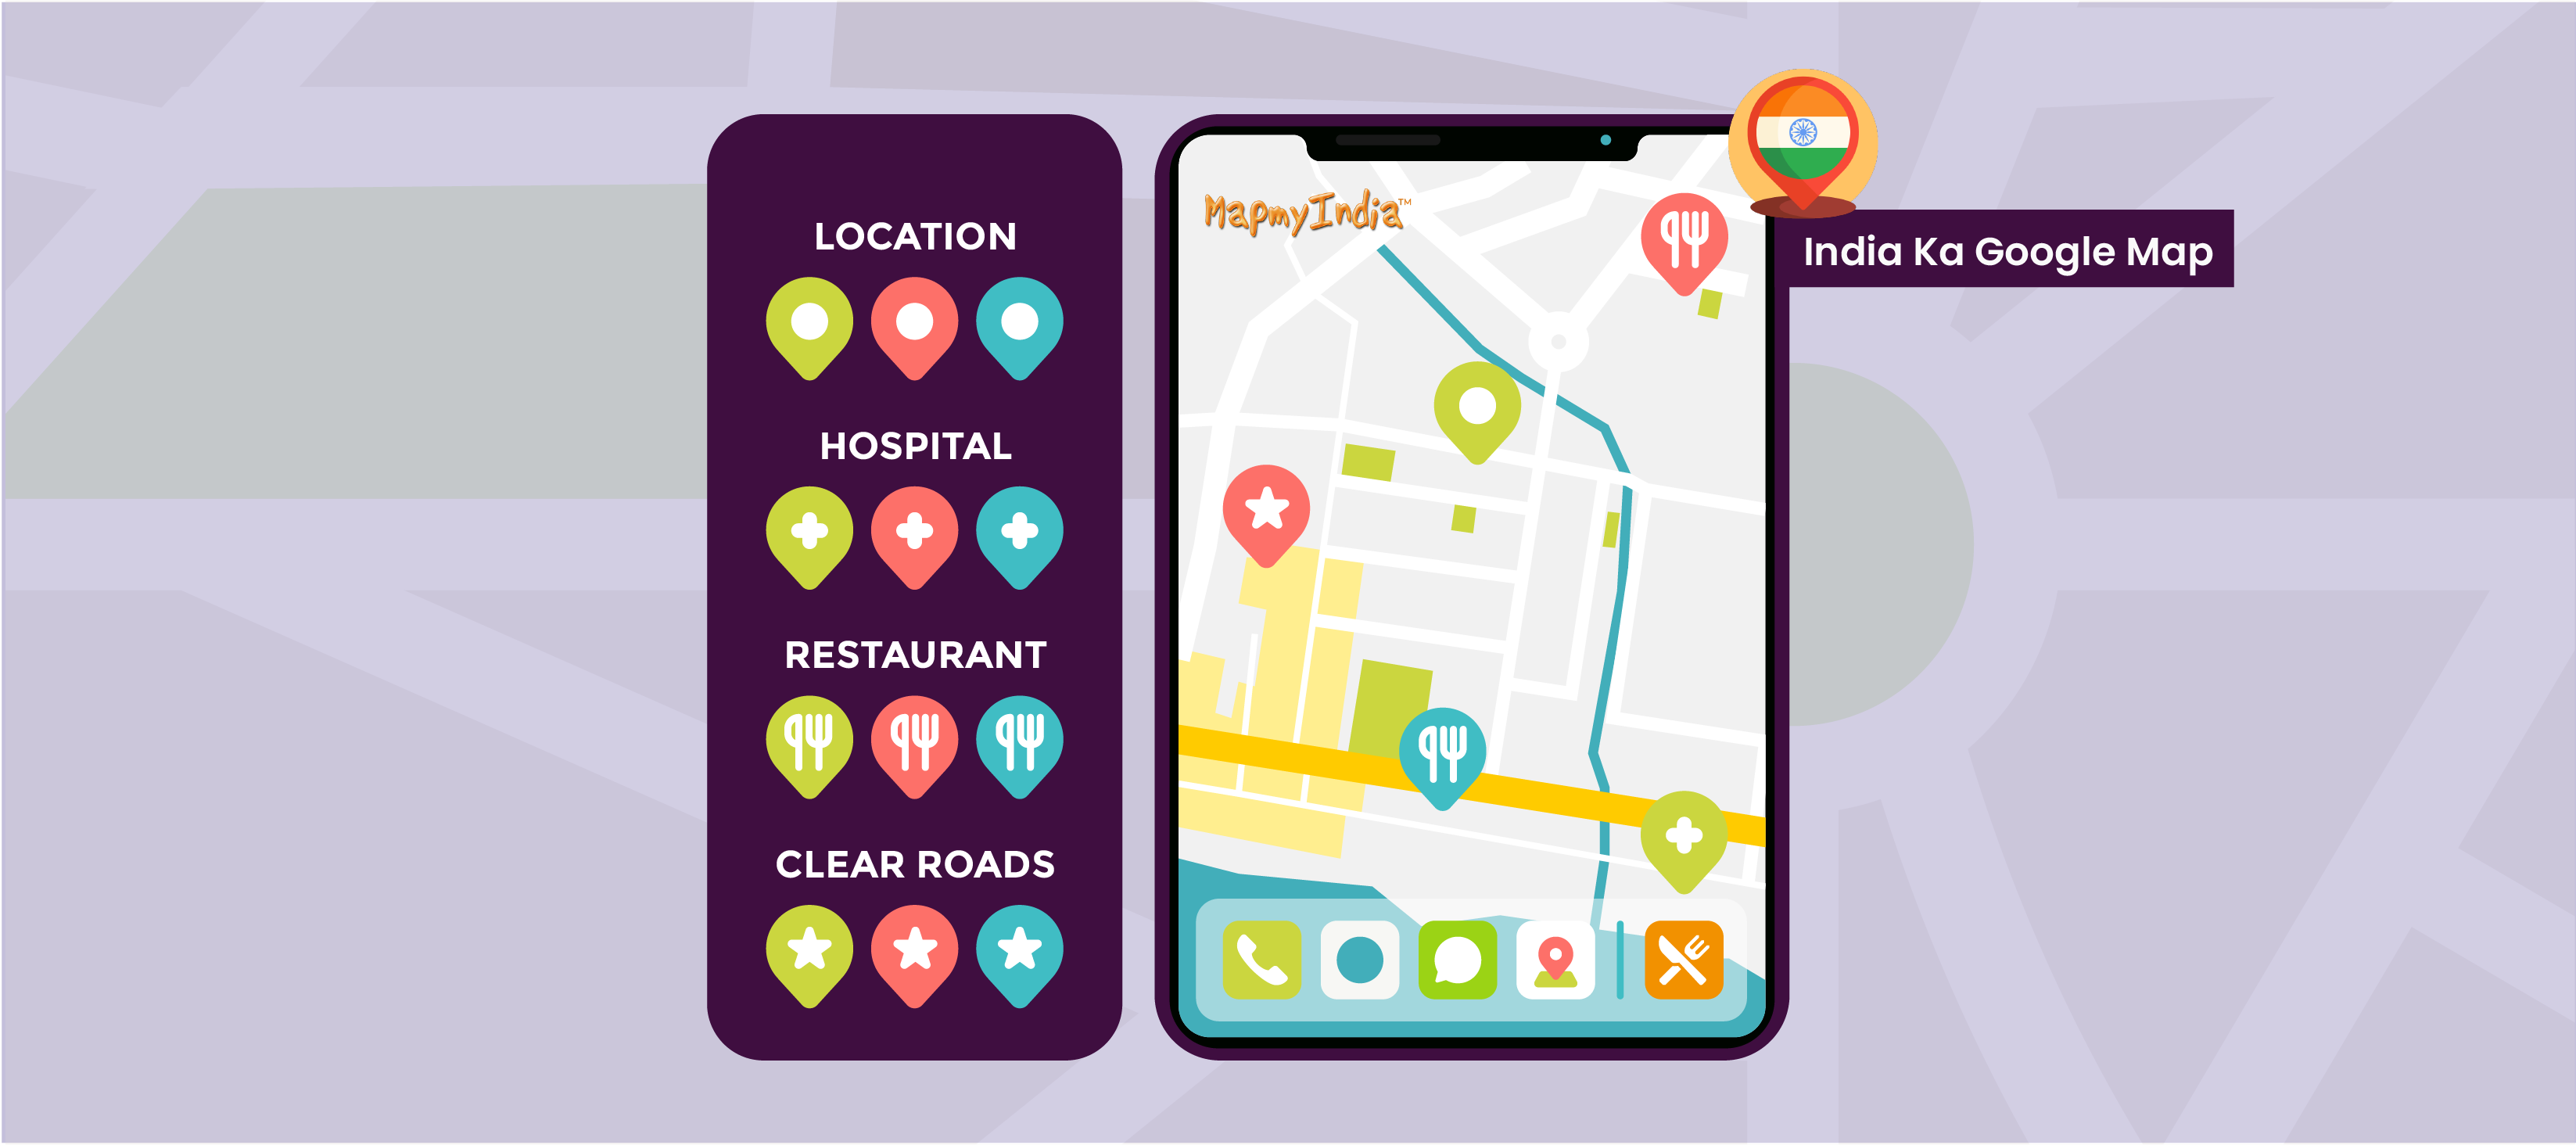 Mappls Mapmyindia Detailed Guide Features INDIA KA GOOGLE MAP Feature Image 